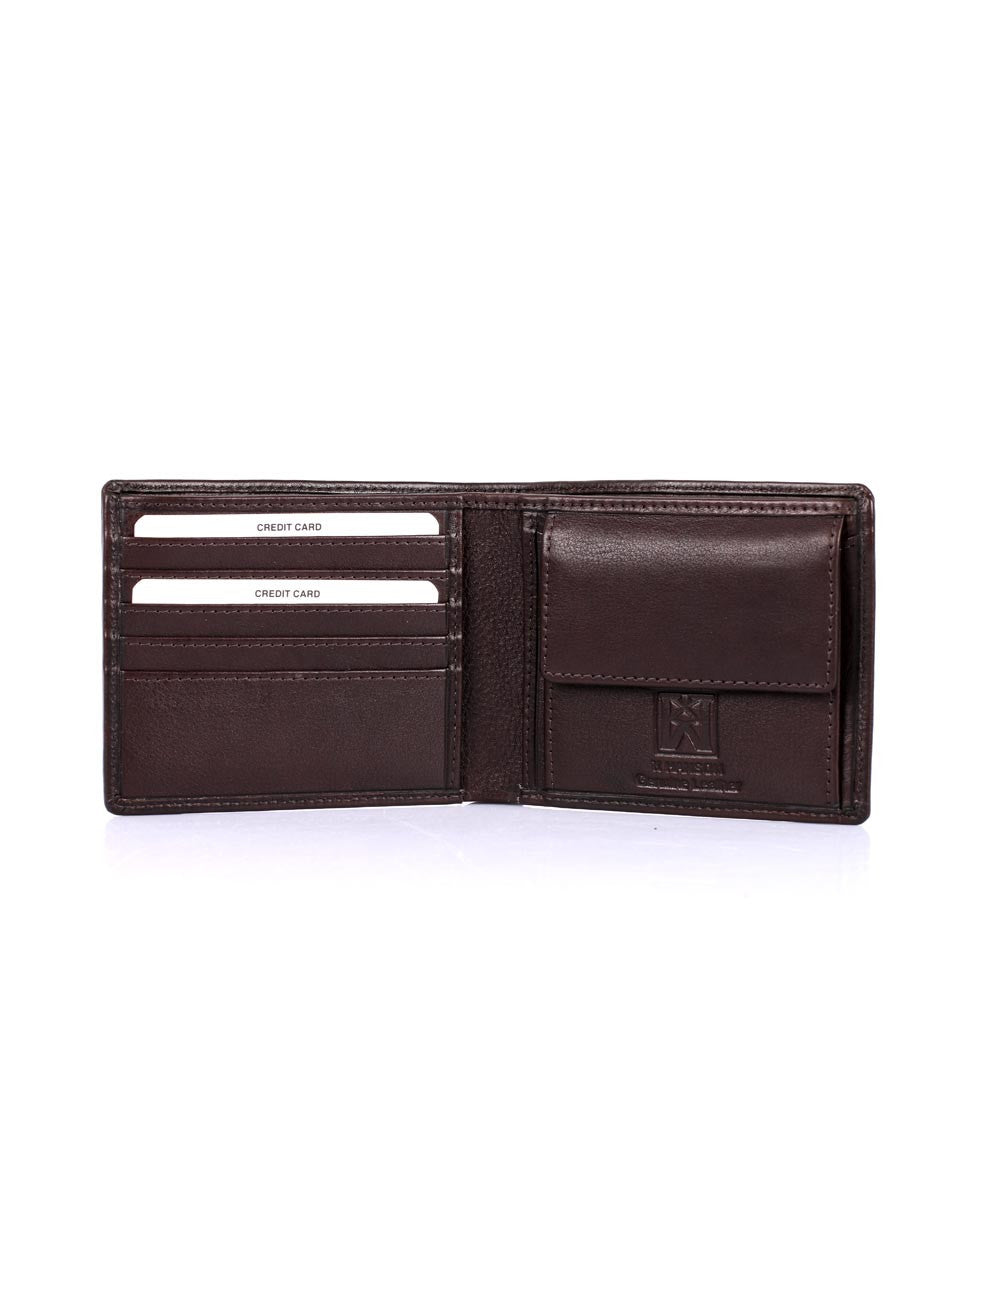 Men's Leather Bifold Wallet With Coin Pocket - Gifts For Men